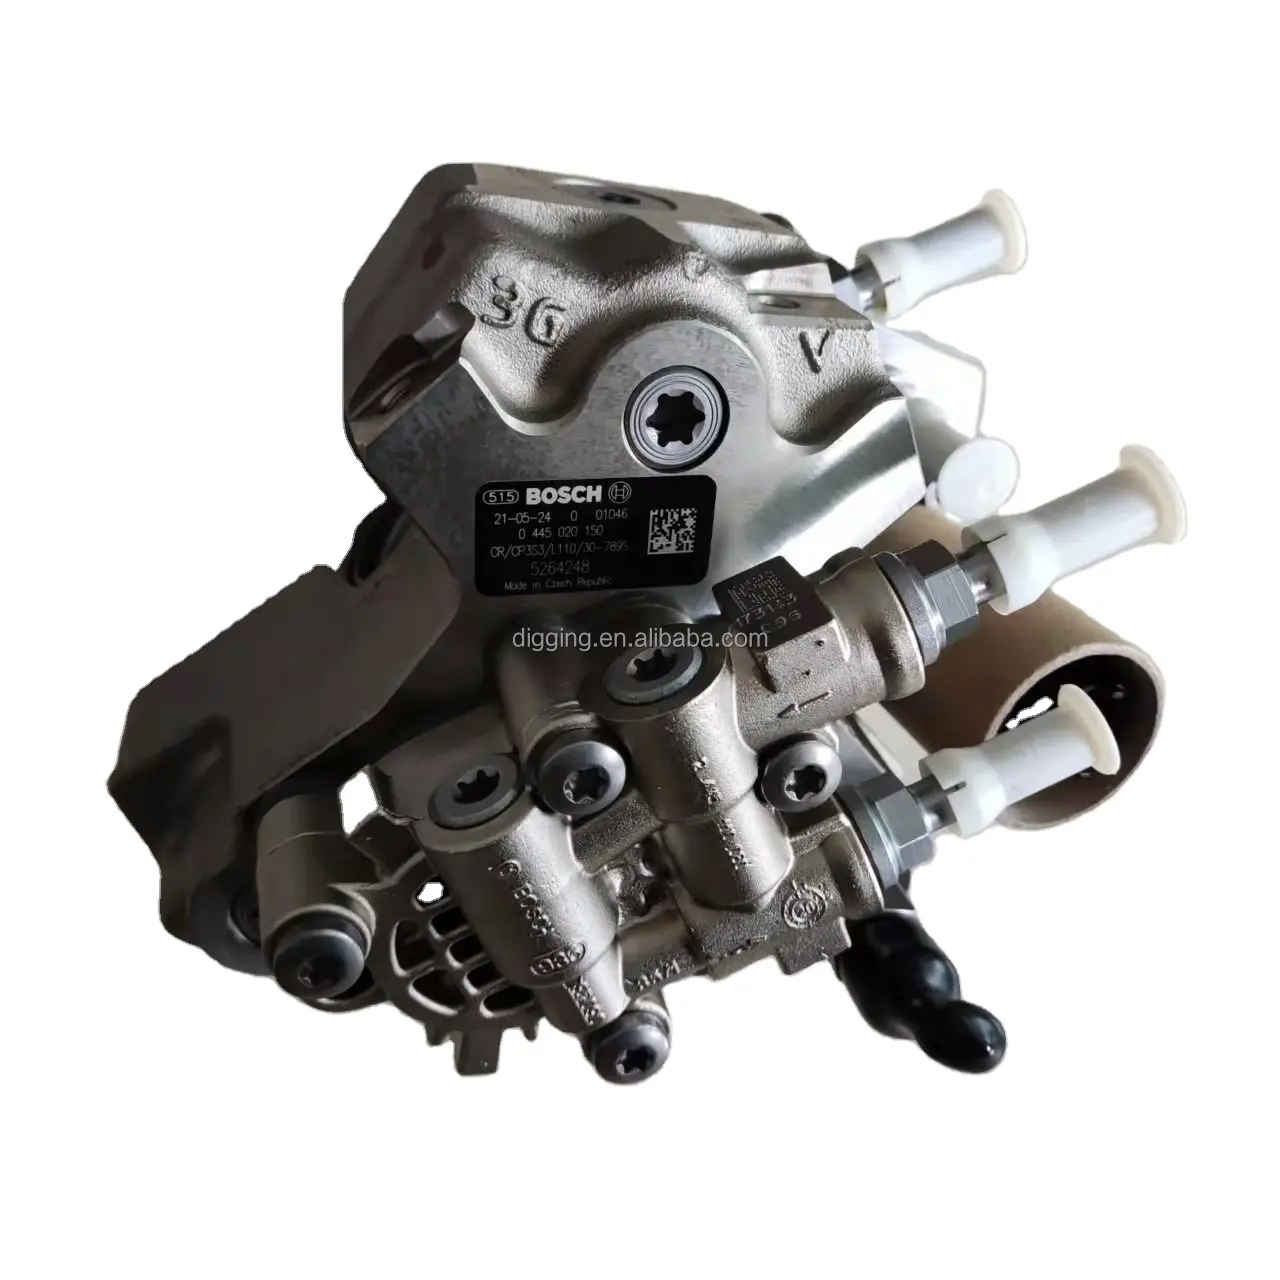 5264248 high quality Fuel pump digging engine part 5264248 2872930 3975927 with reasonable price